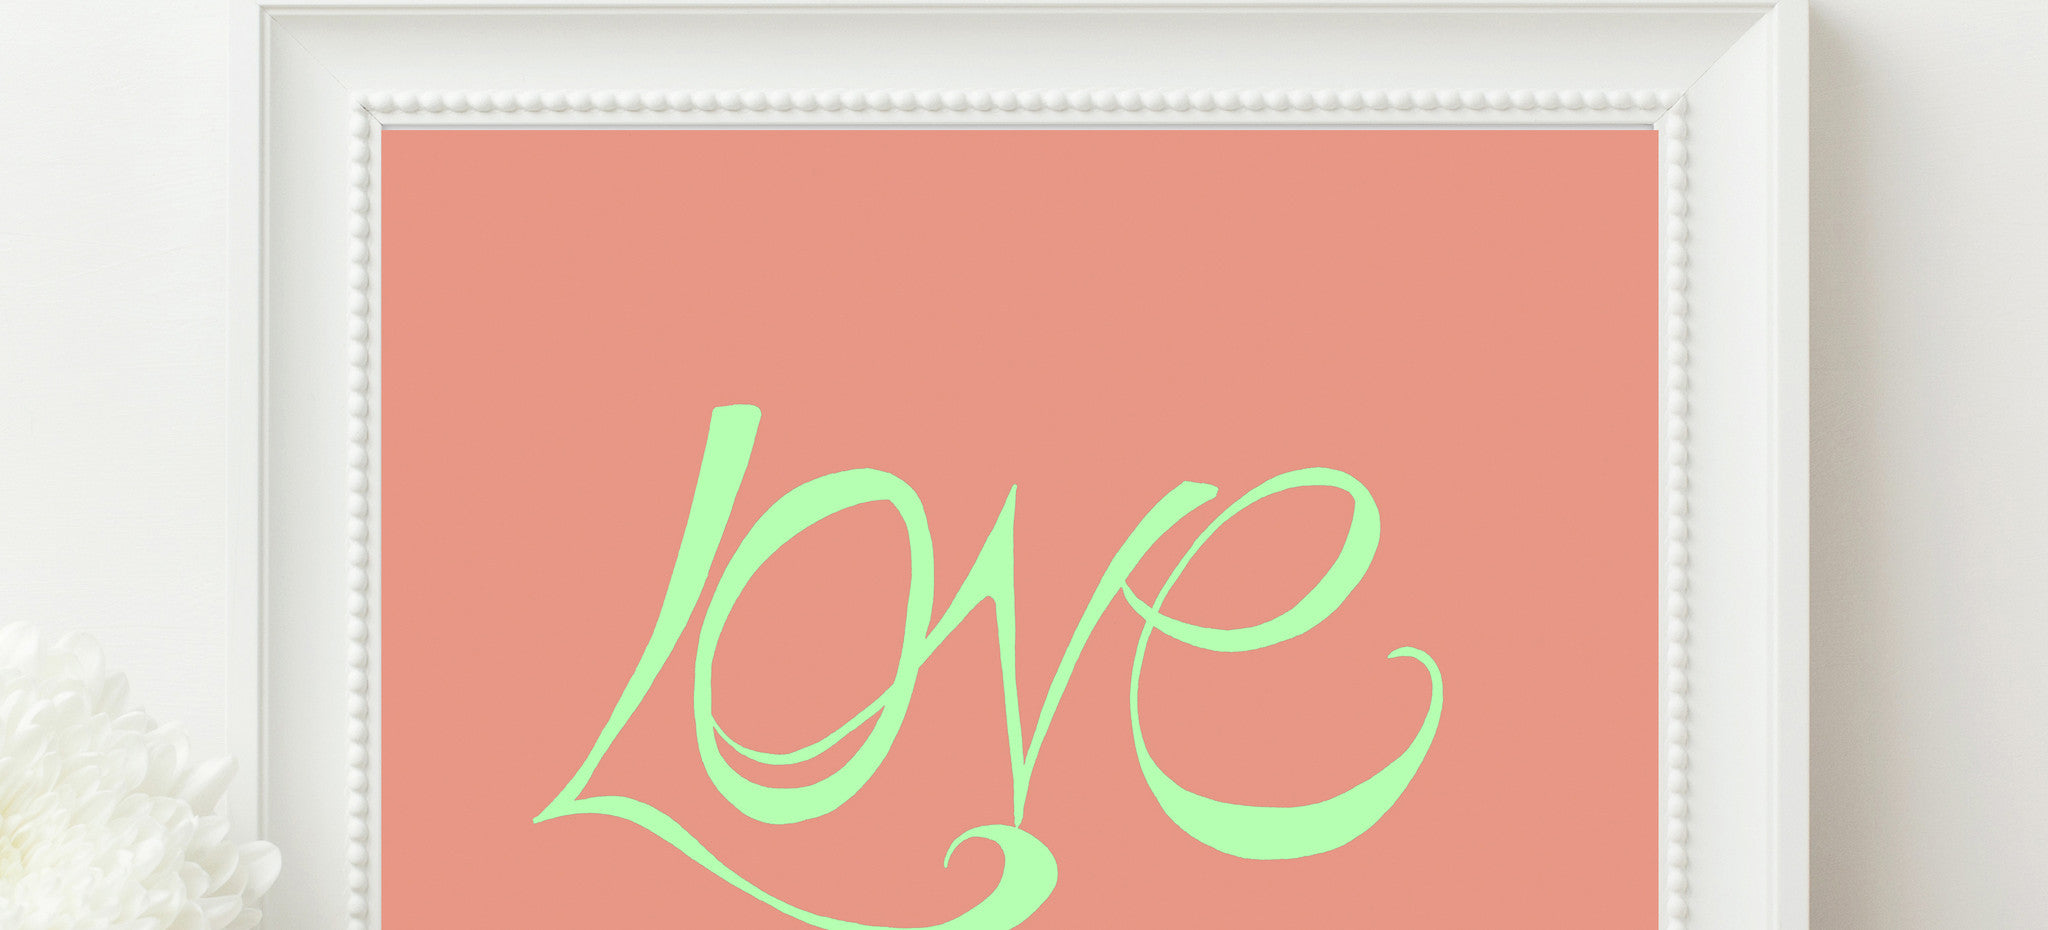 Hand Illustrated Love Print - Mint on Coral